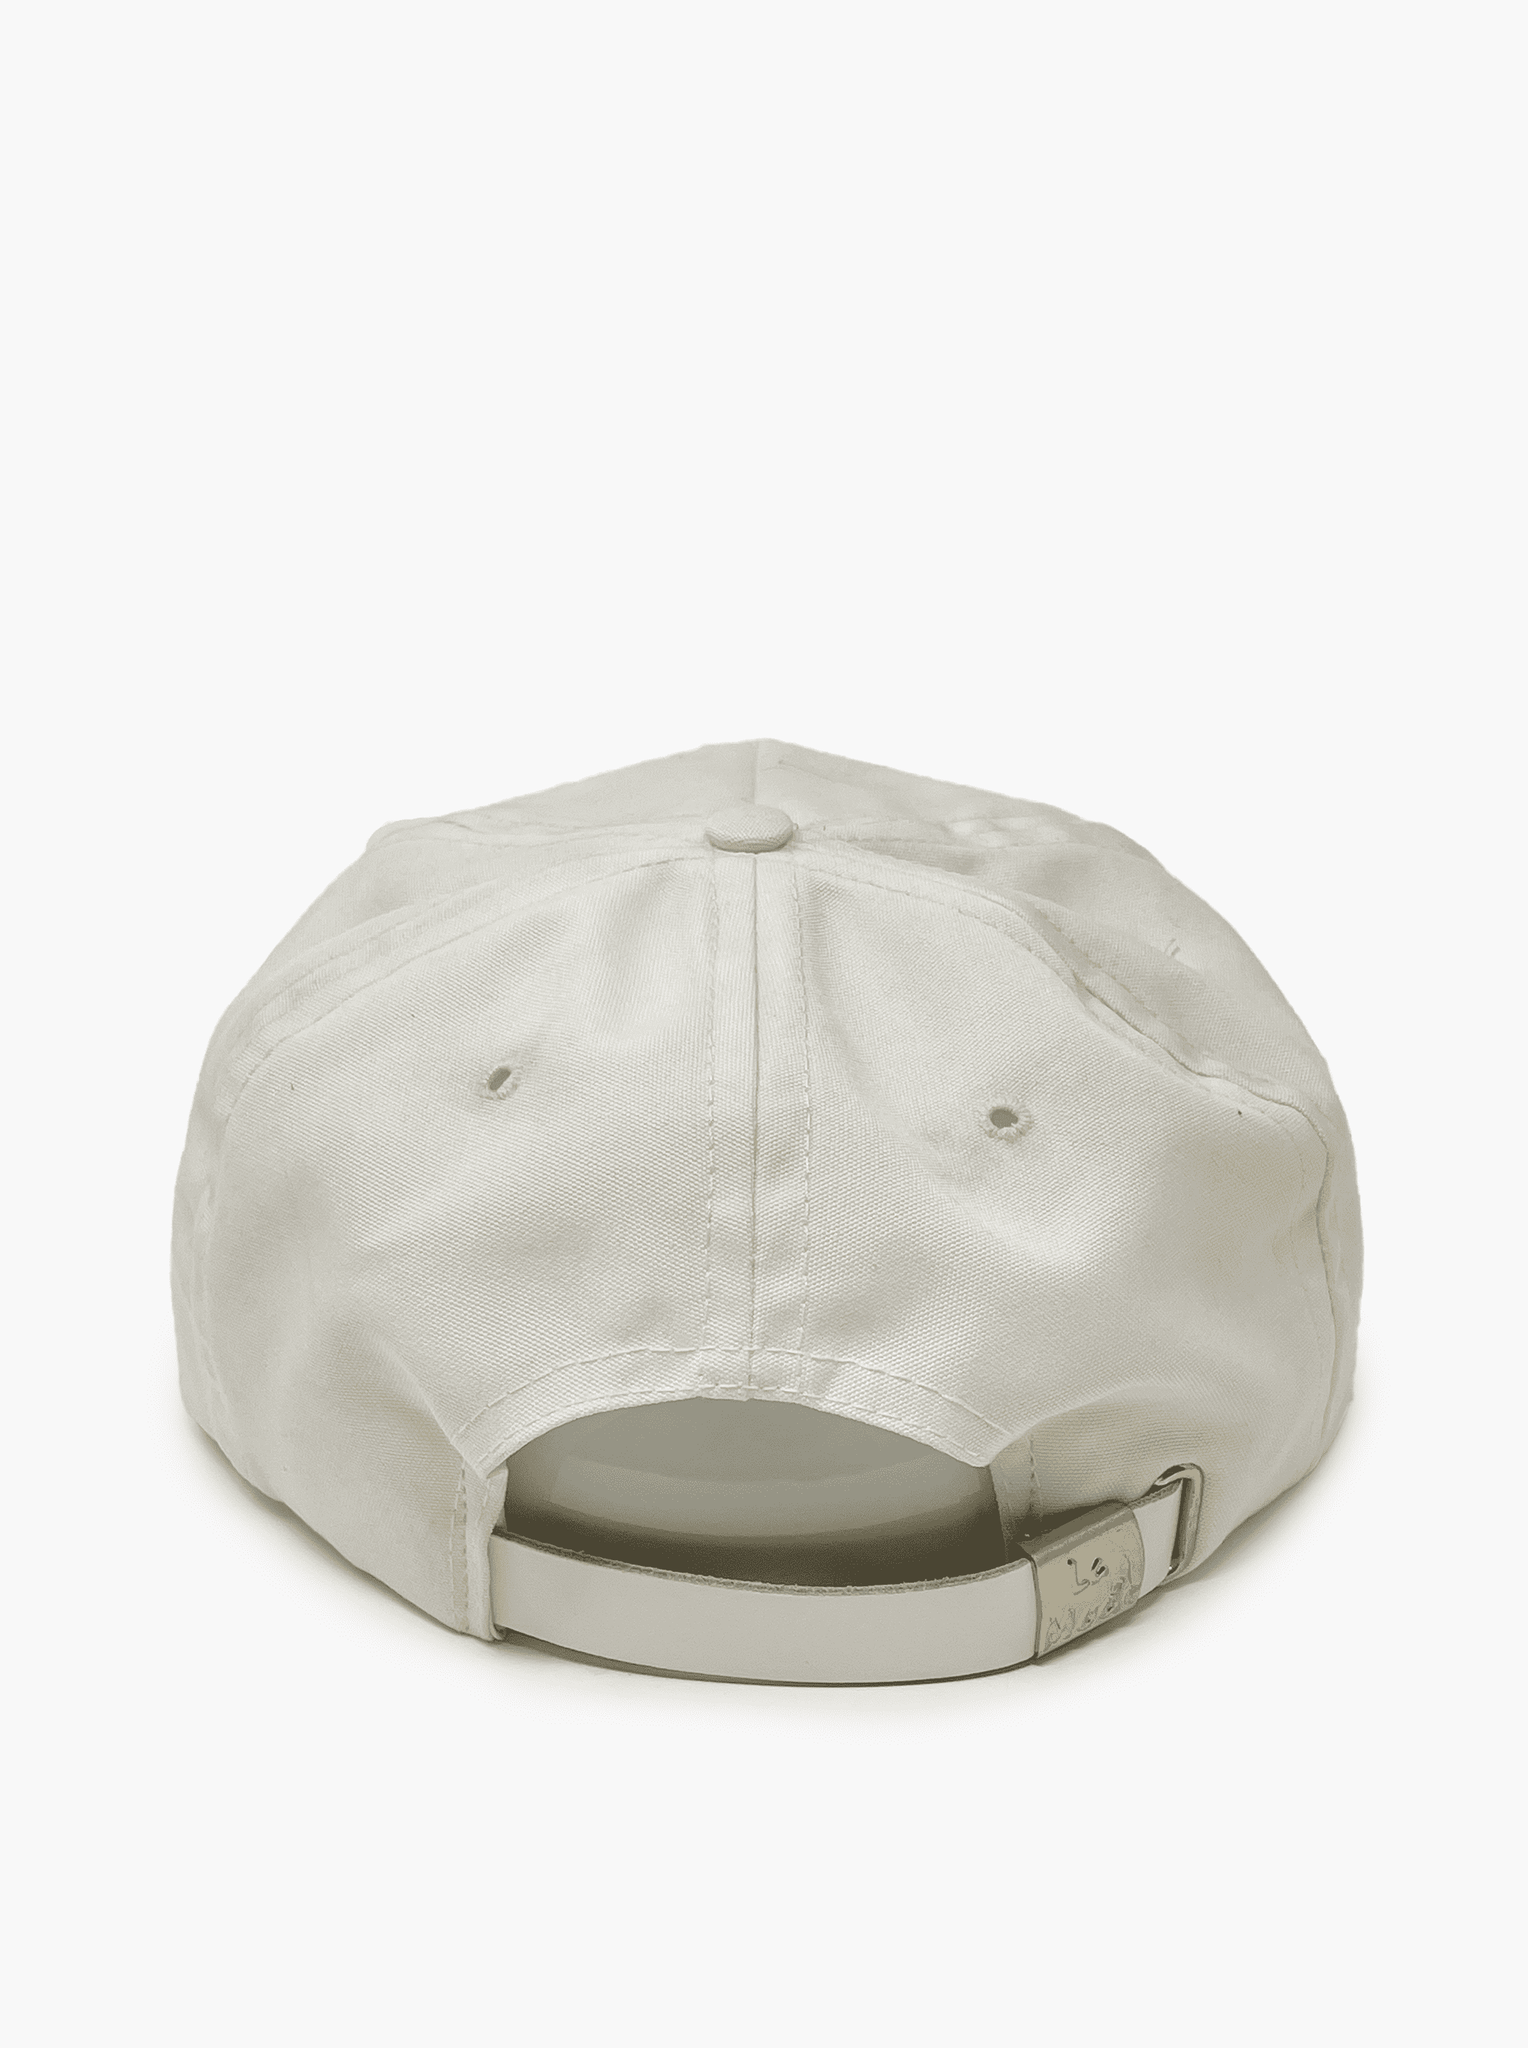 Vintage white Cadillac golf hat pro-am series - back view - Golfitecture 